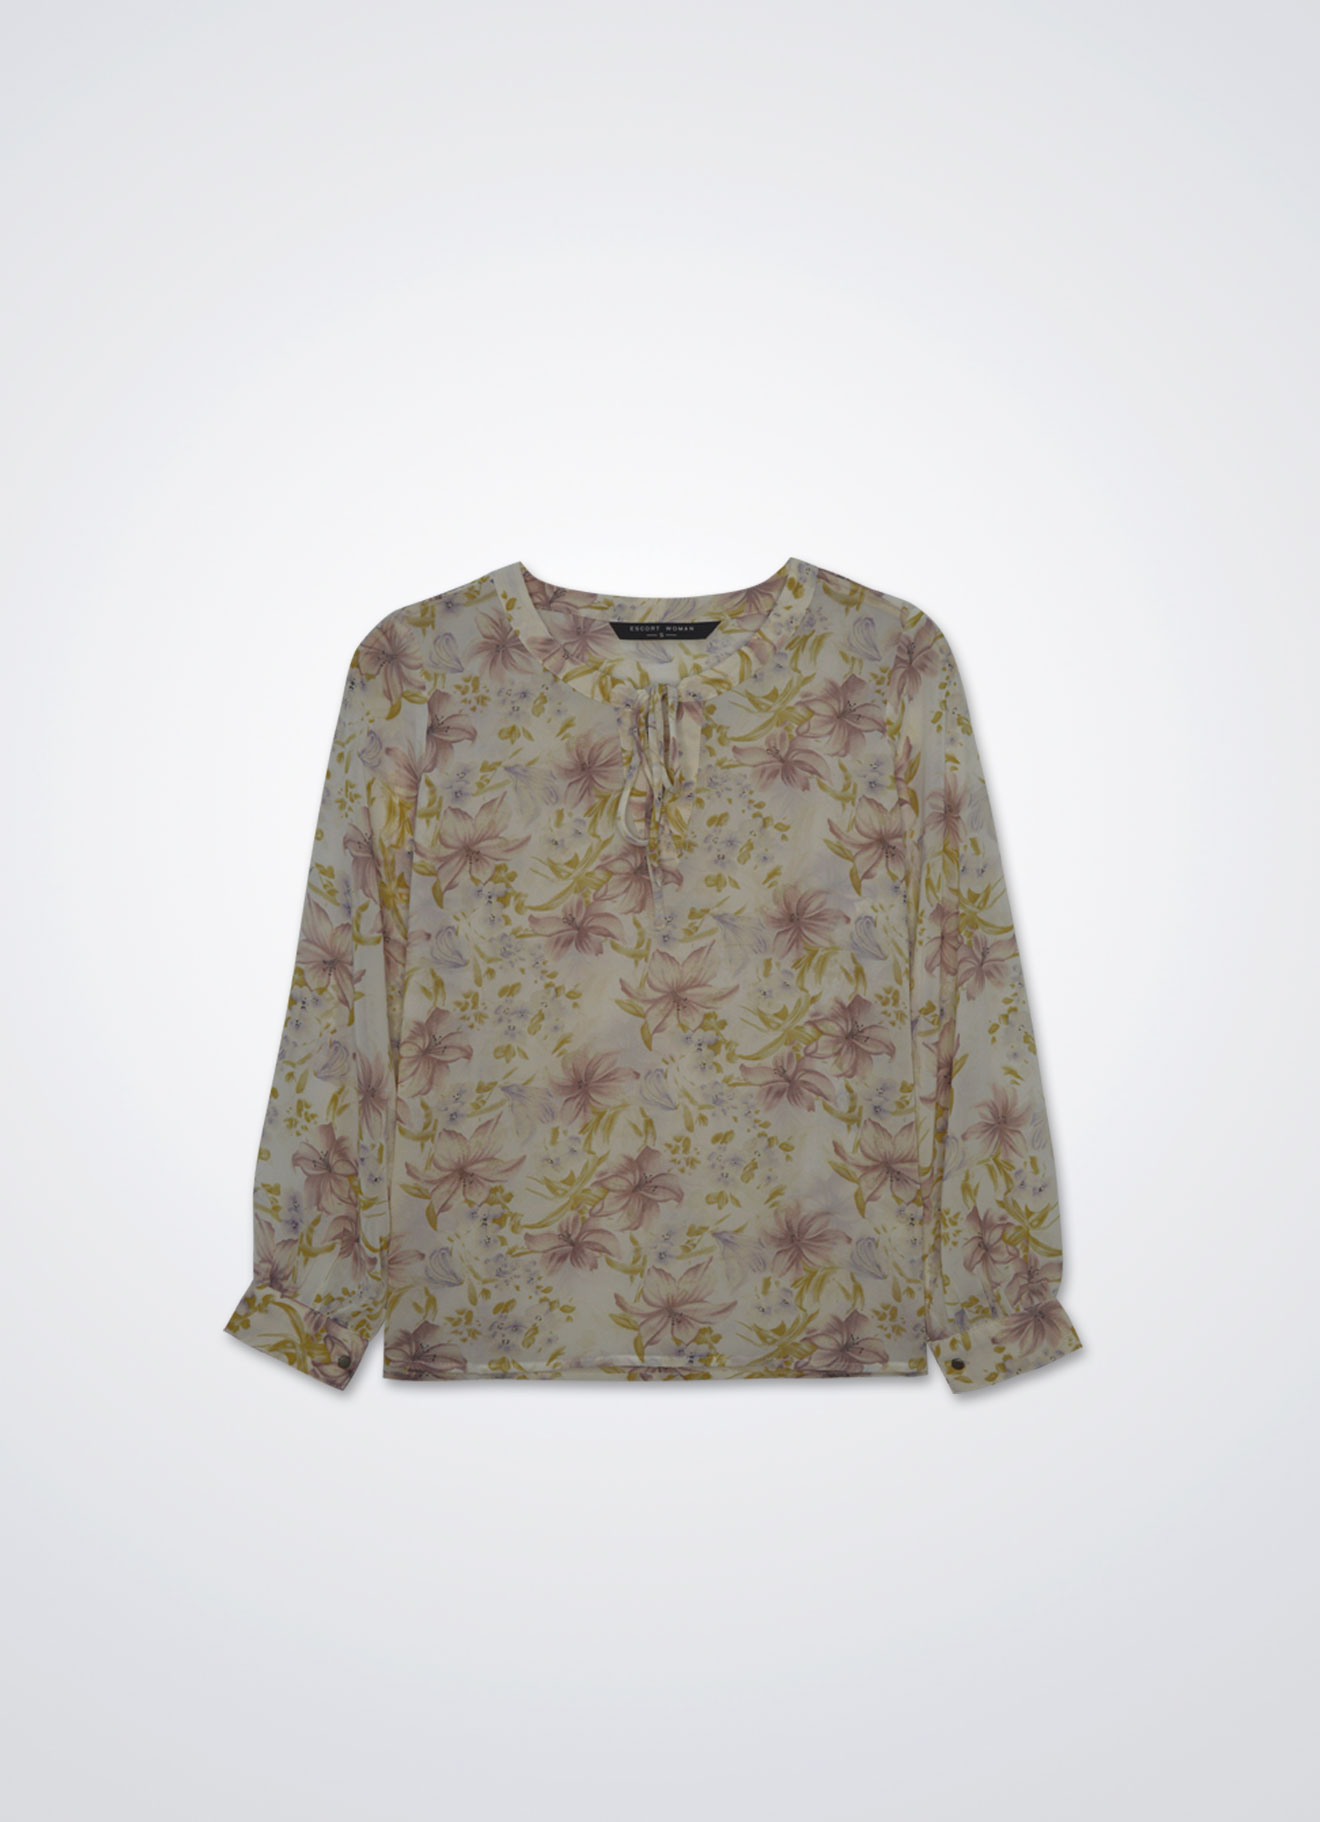 Snow-White by Floral Printed Blouse